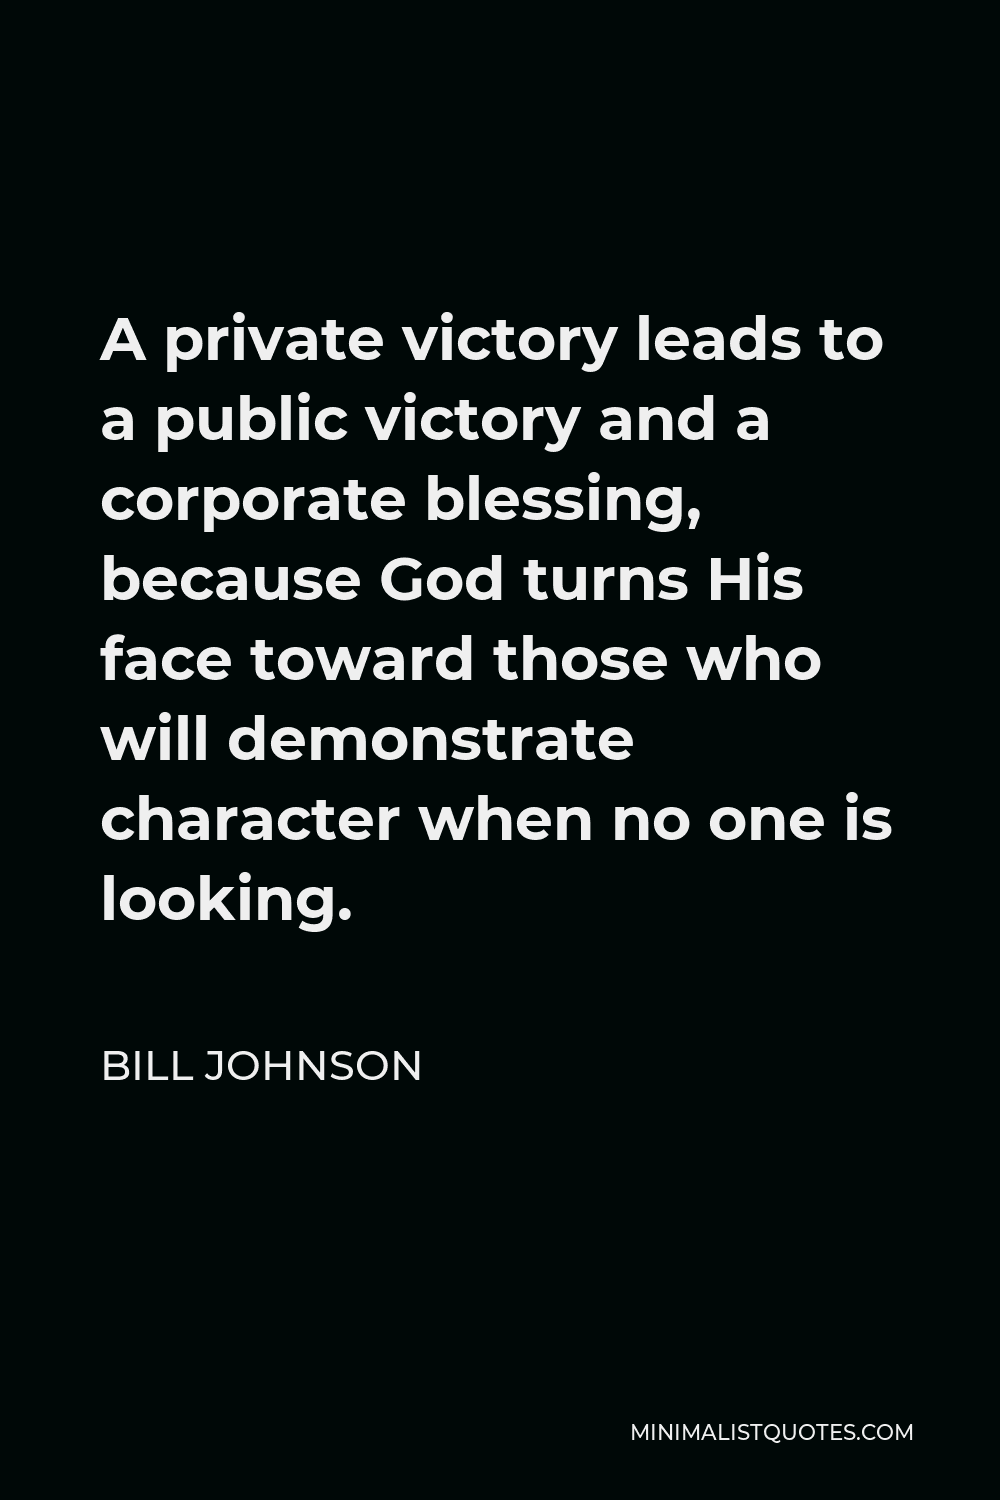 Bill Johnson Quote - A private victory leads to a public victory and a corporate blessing, because God turns His face toward those who will demonstrate character when no one is looking.